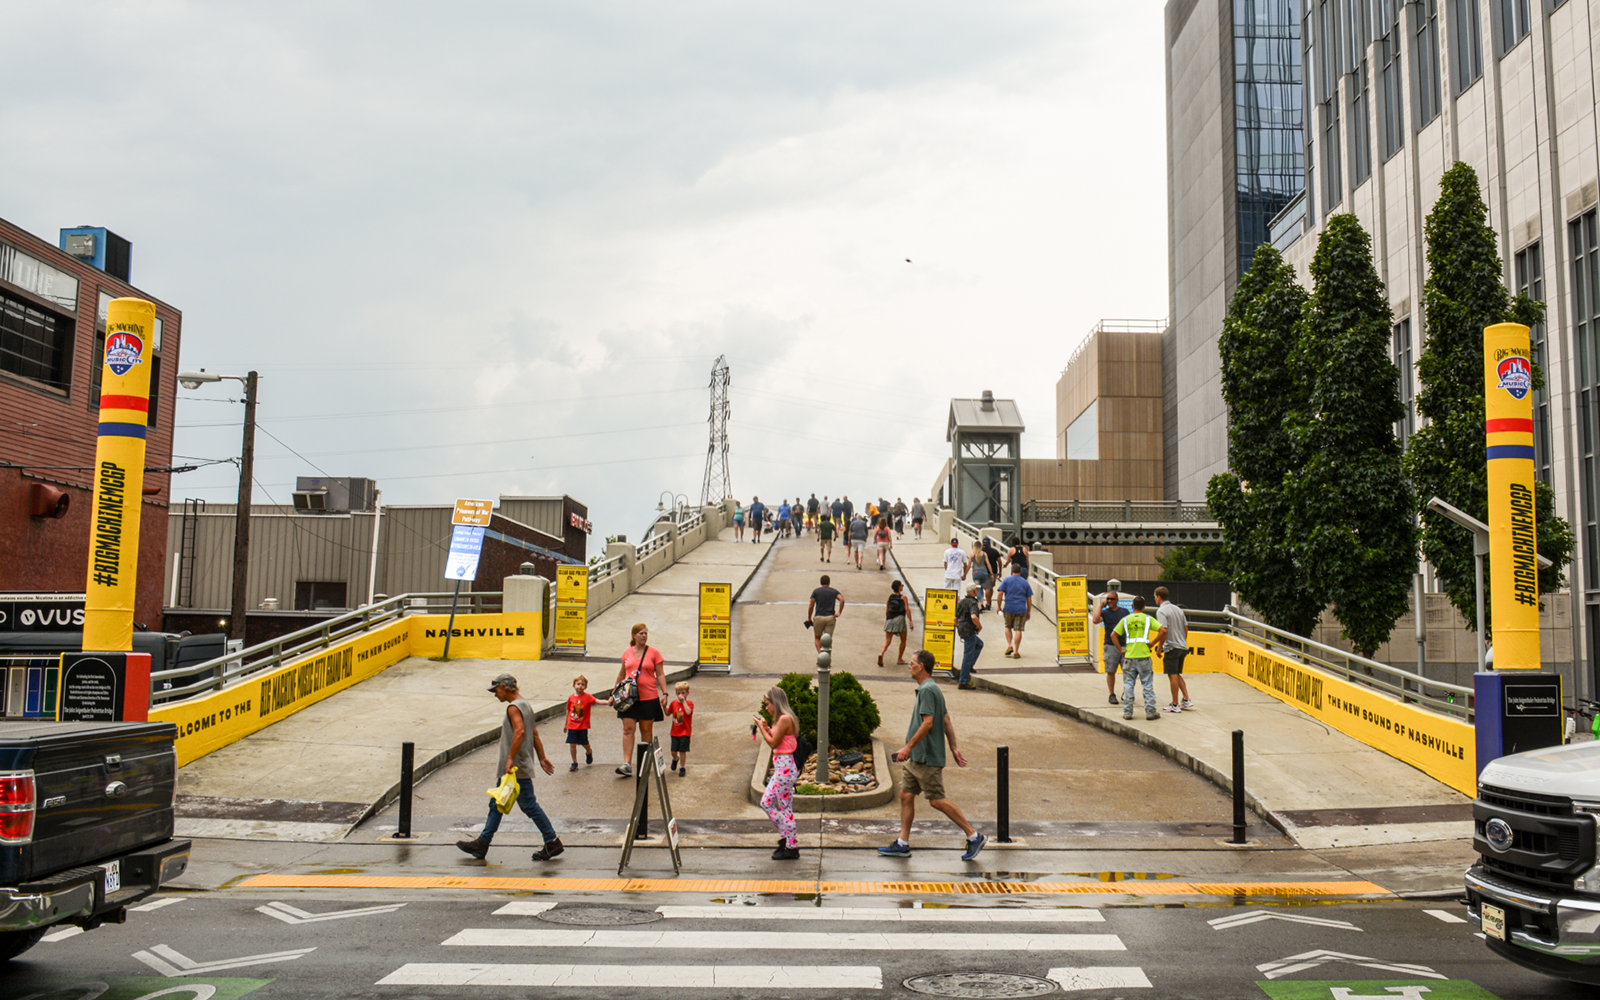 bright yellow wraps branding the entrance to the pedestrian bridge for the inaugural year